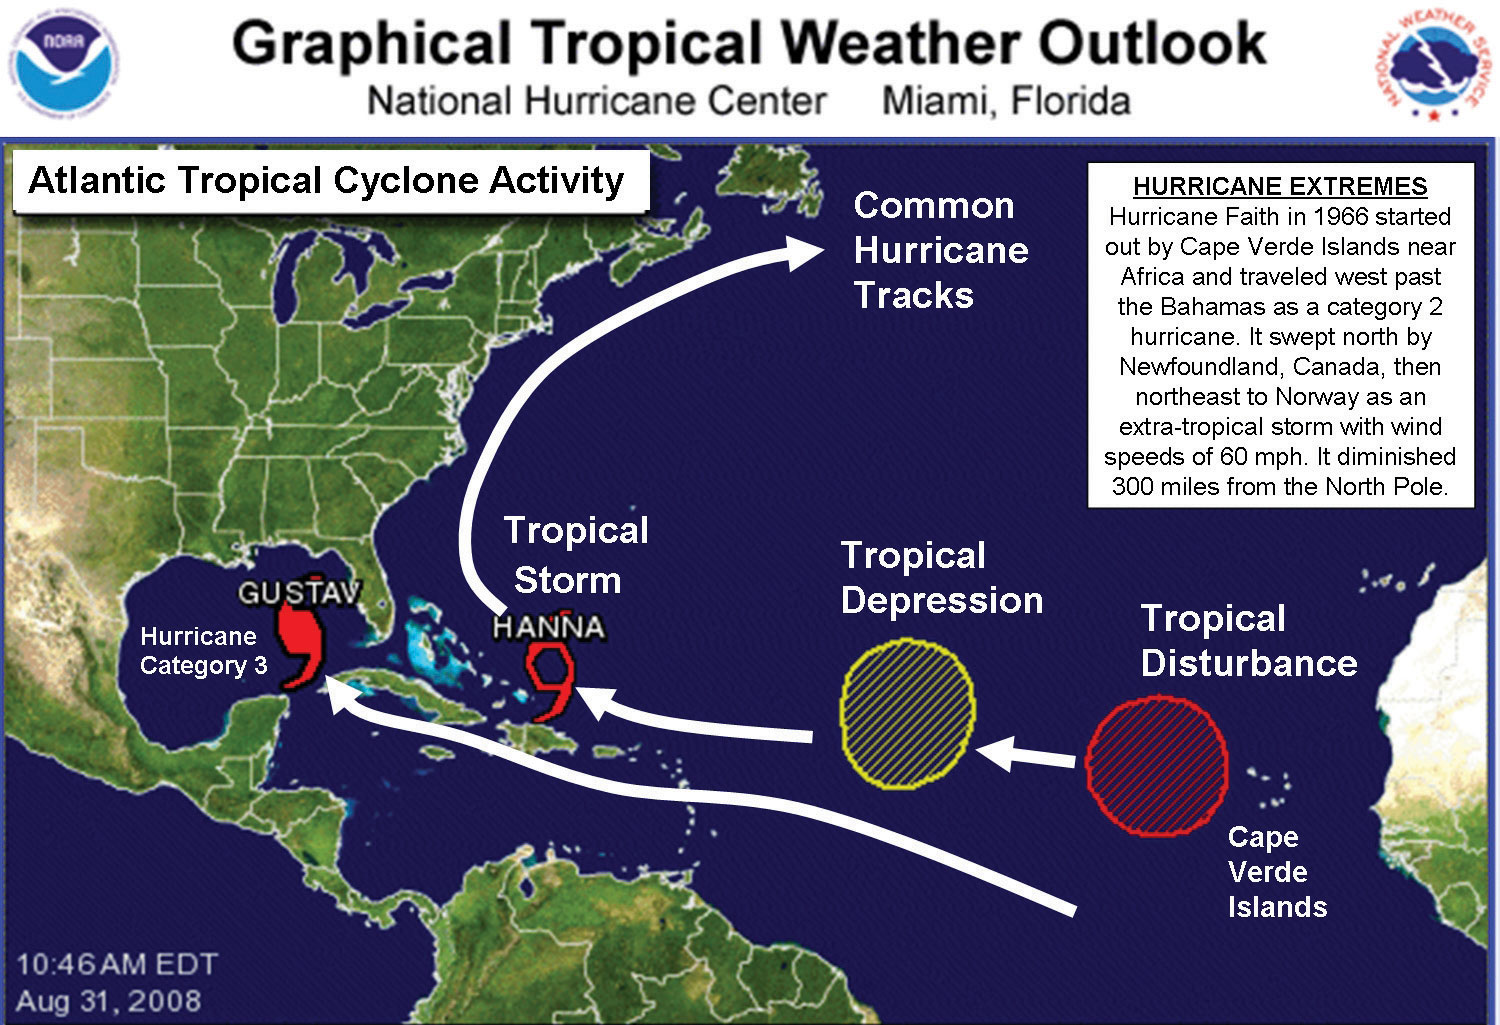 What are the three stages of a tropical cyclone?